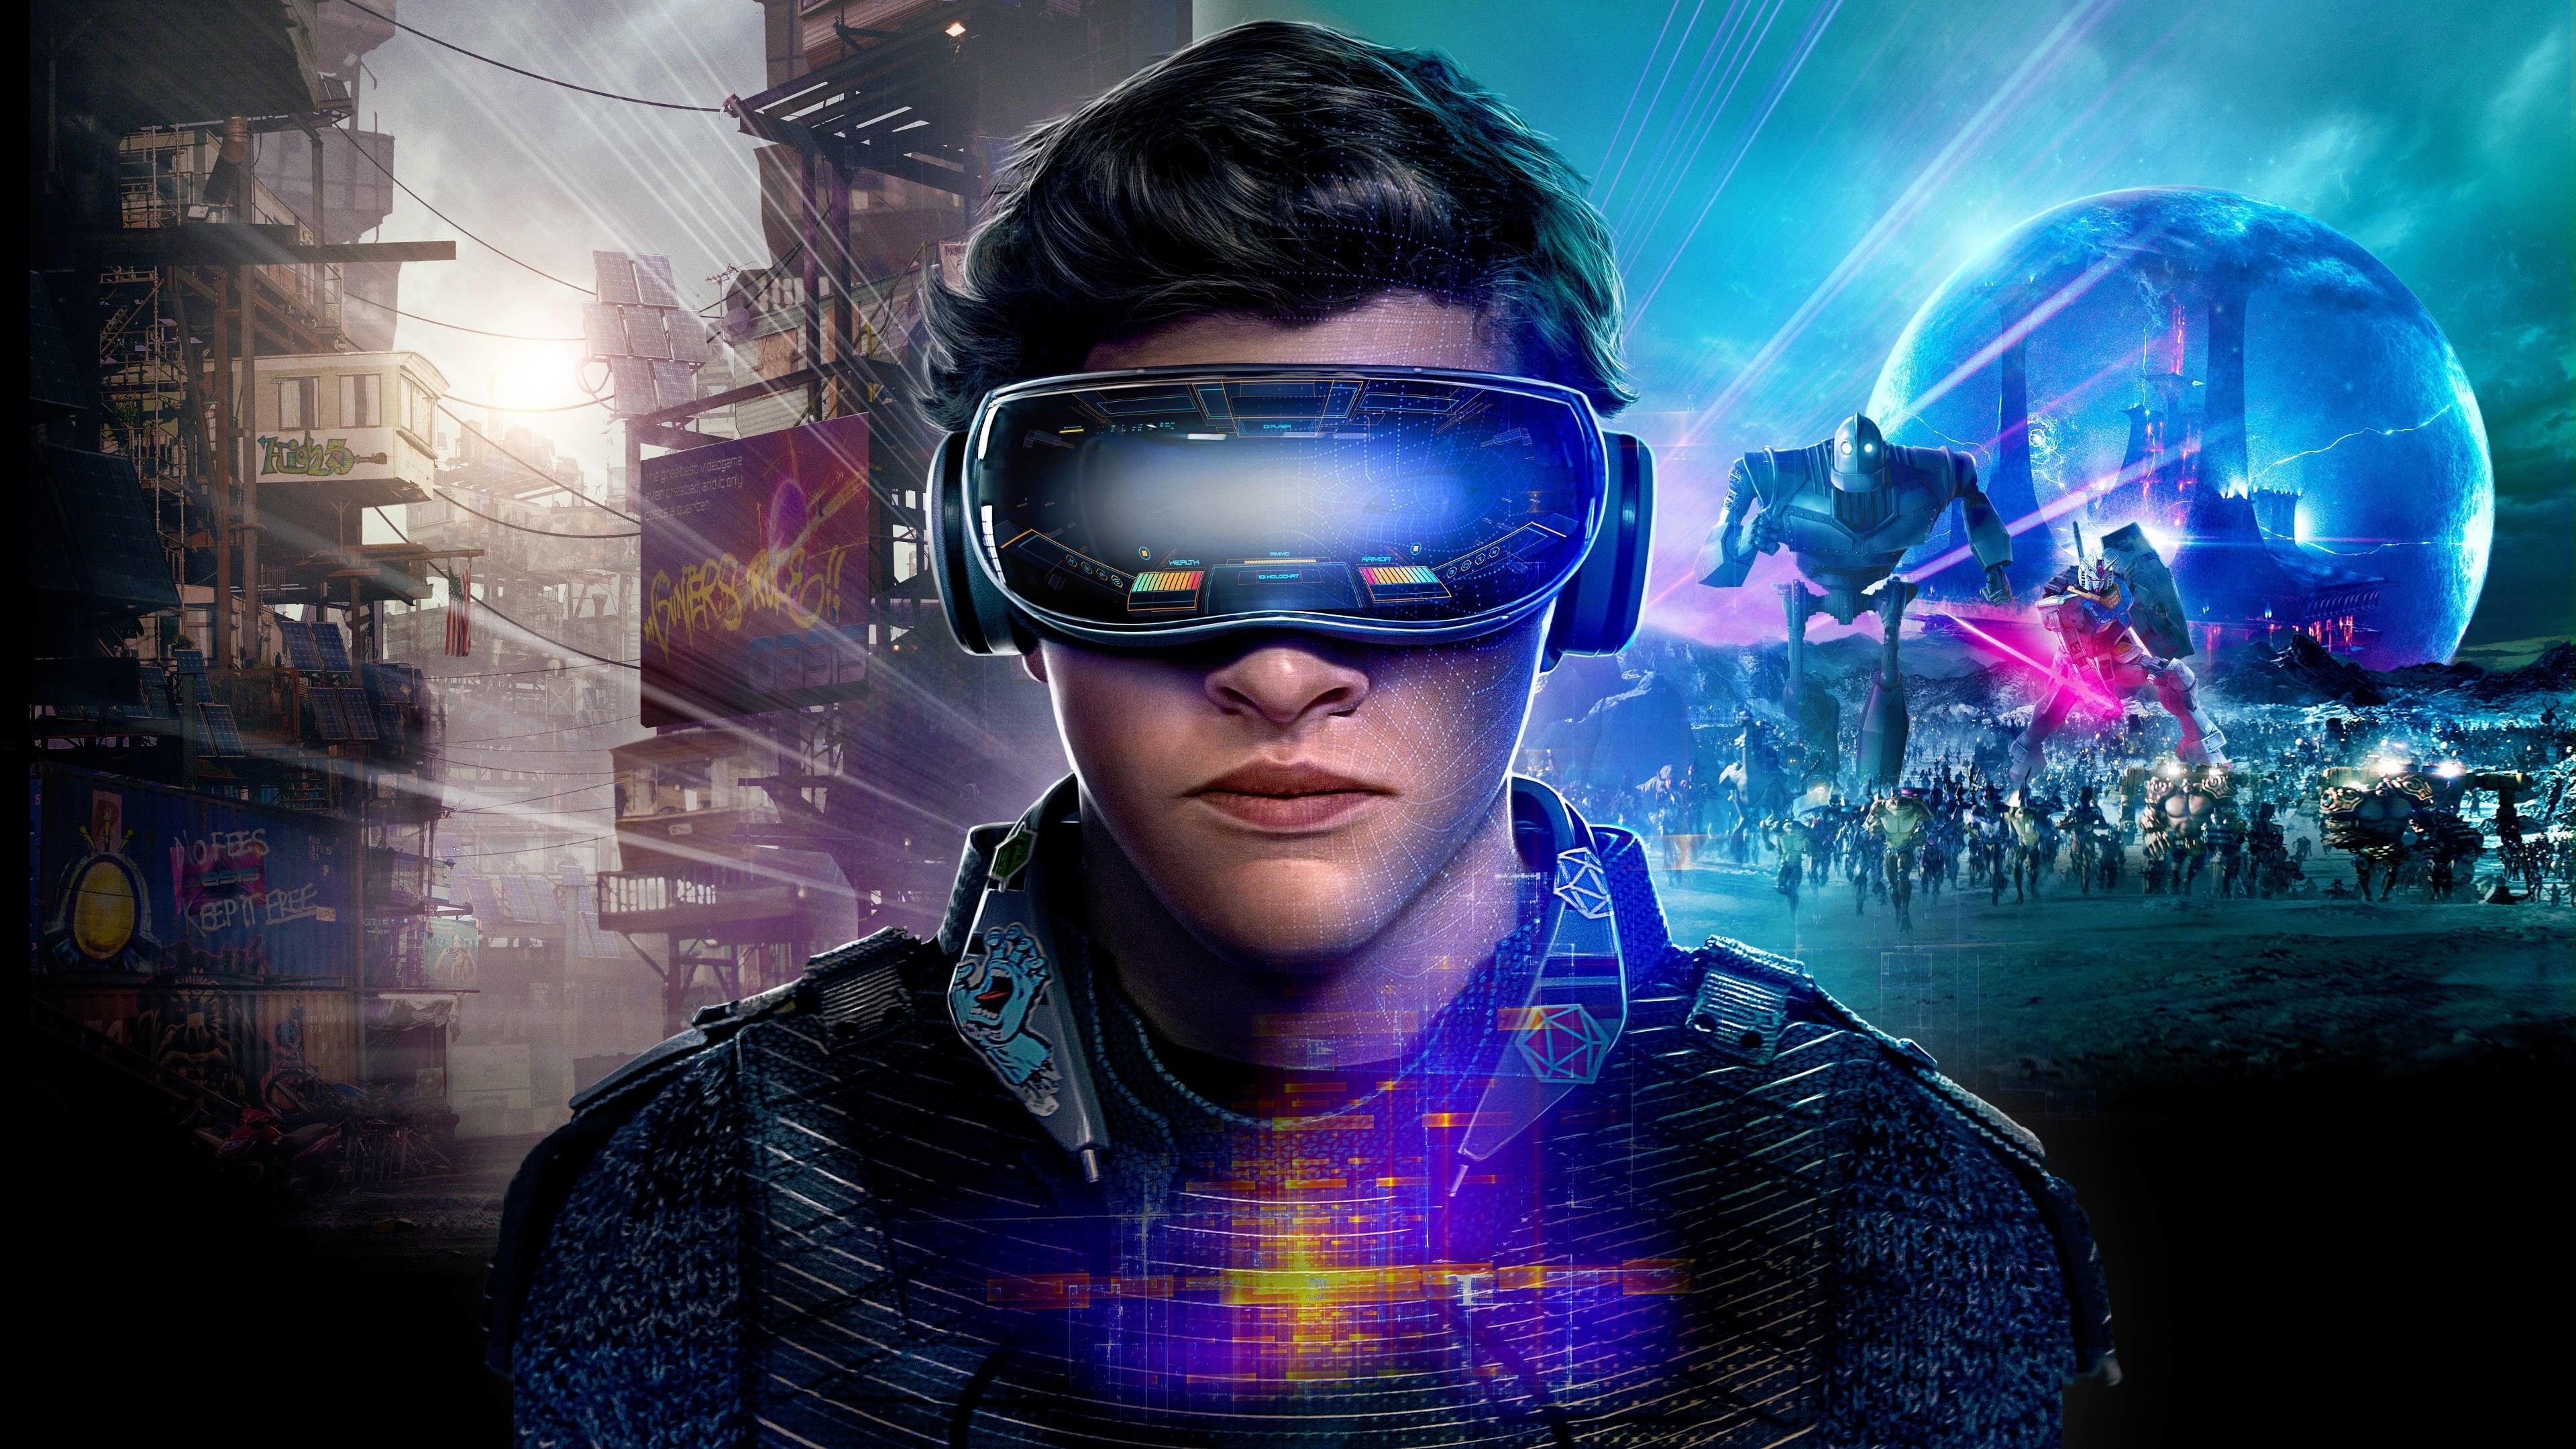 Image du film Ready Player One 9f412976-5147-42d0-8408-abac1482c4e7